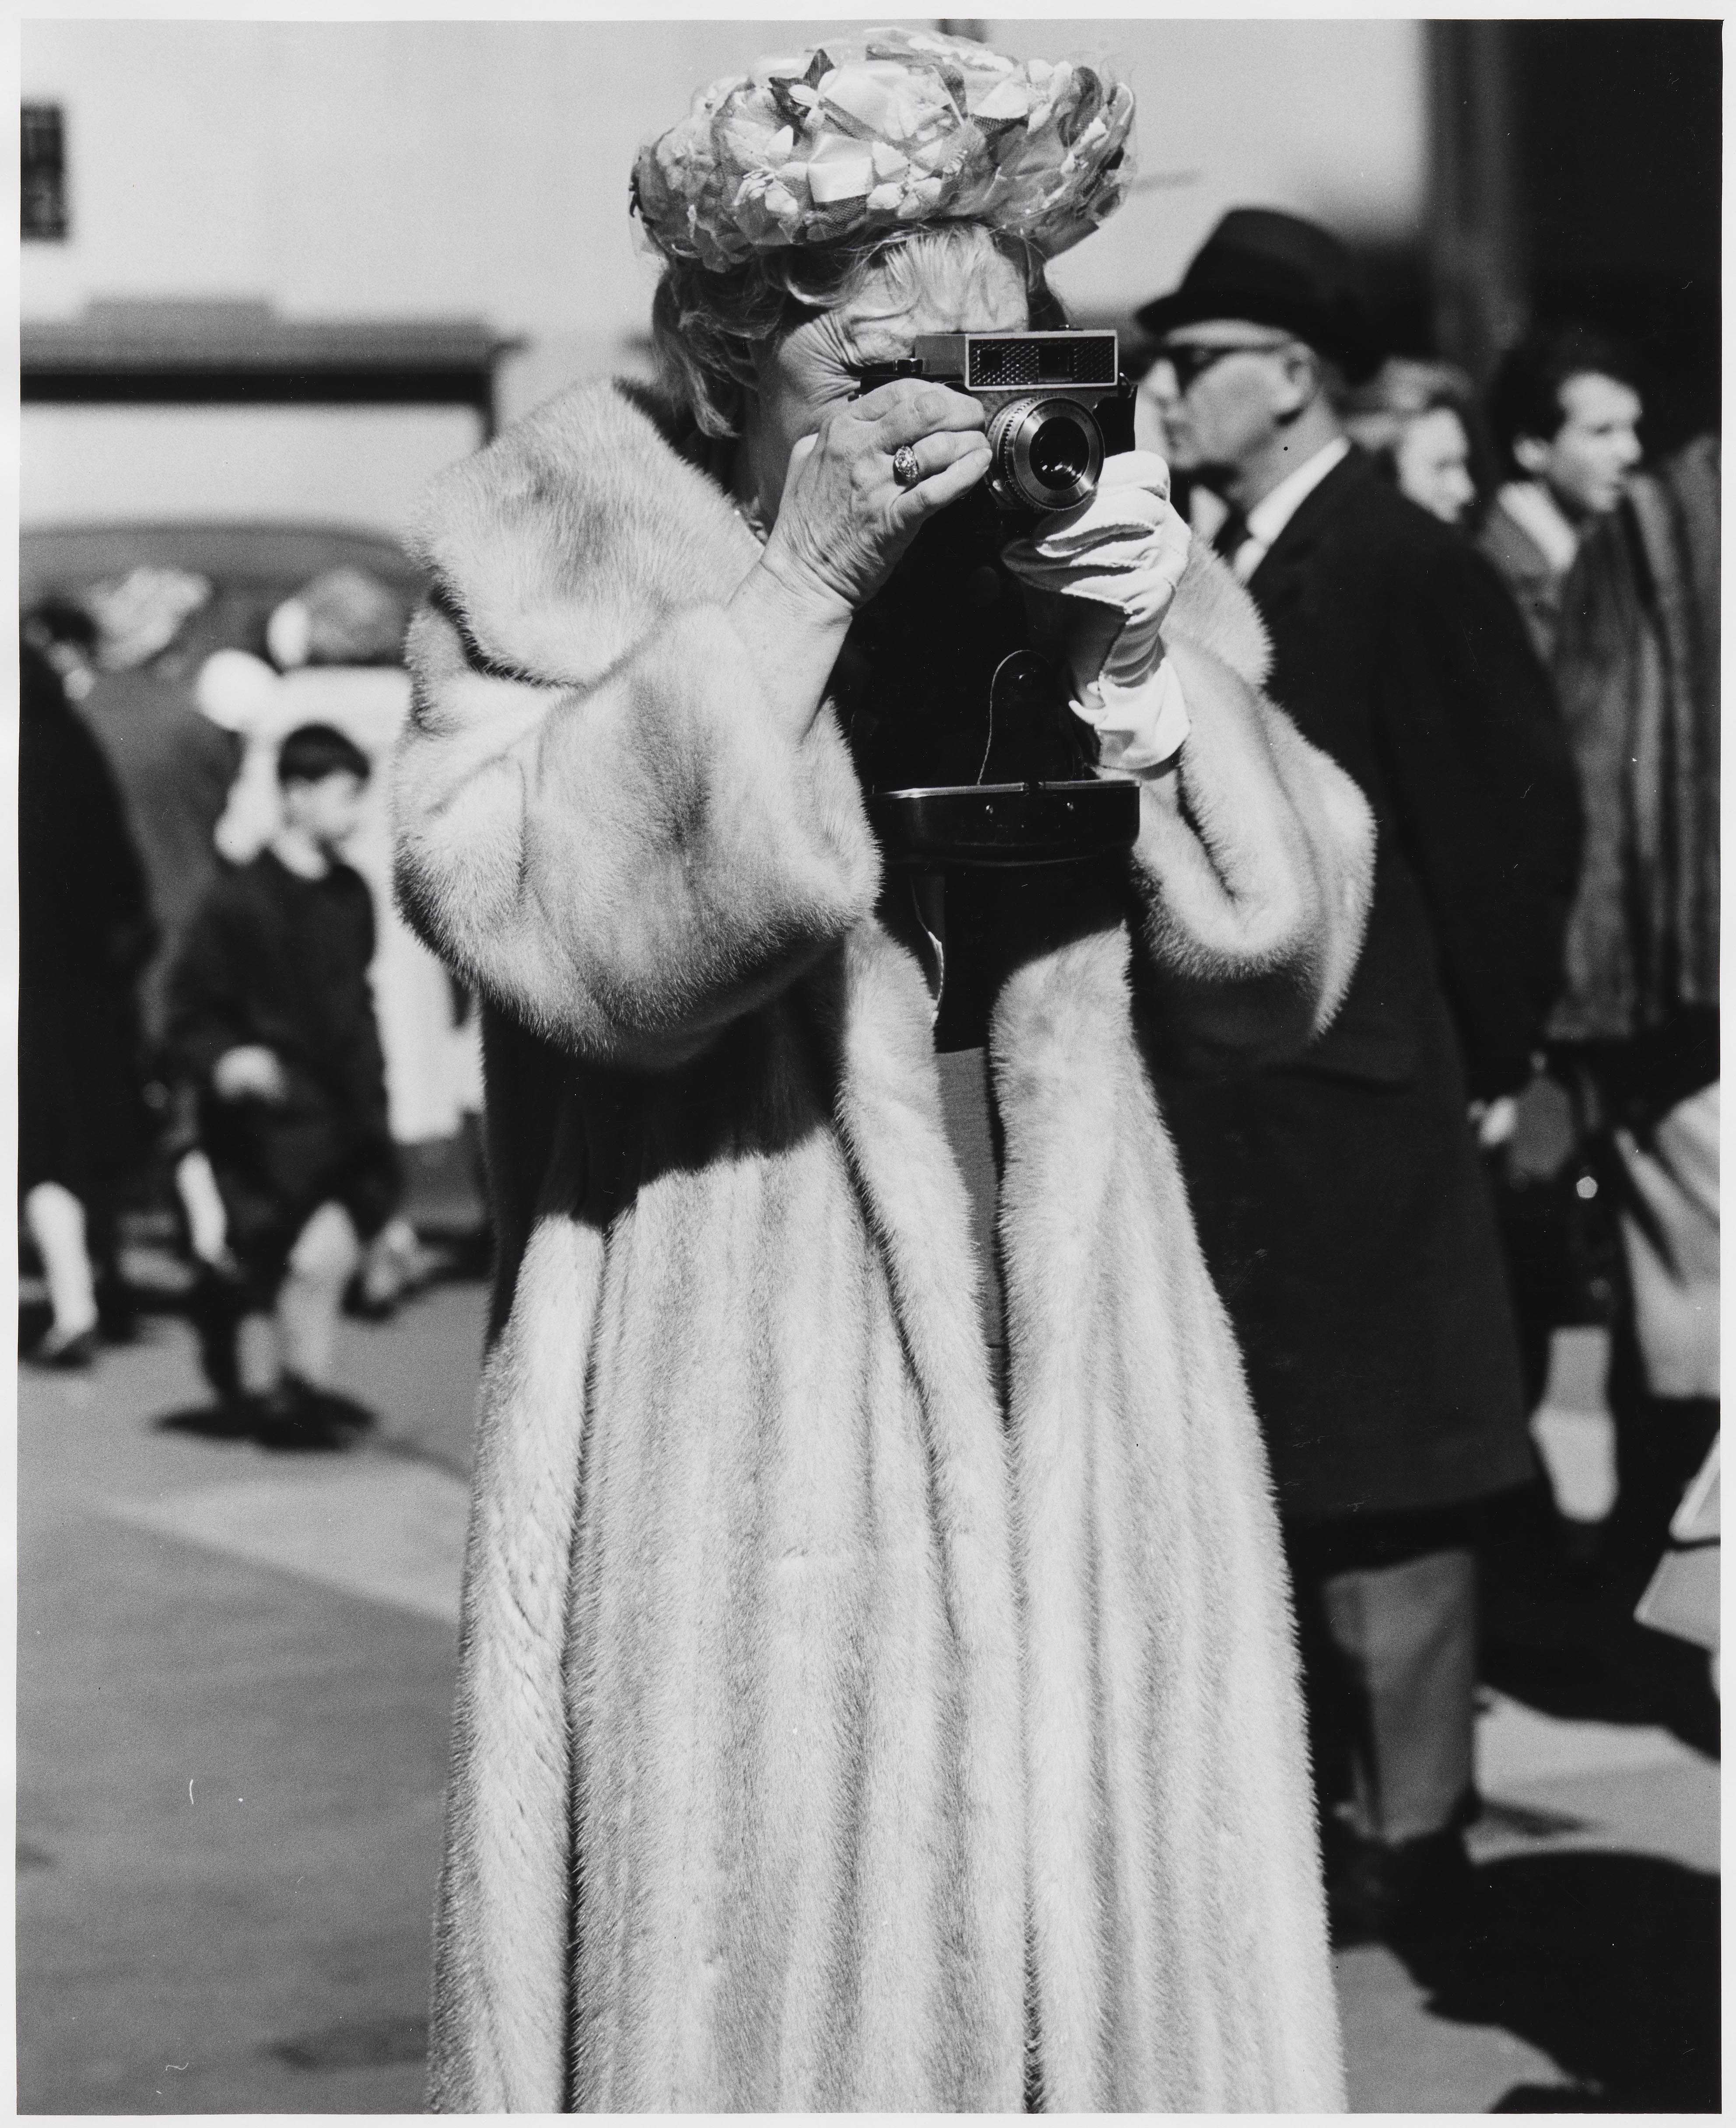 Woman in Fur Coat with Camera, Easter, St. Patrick's